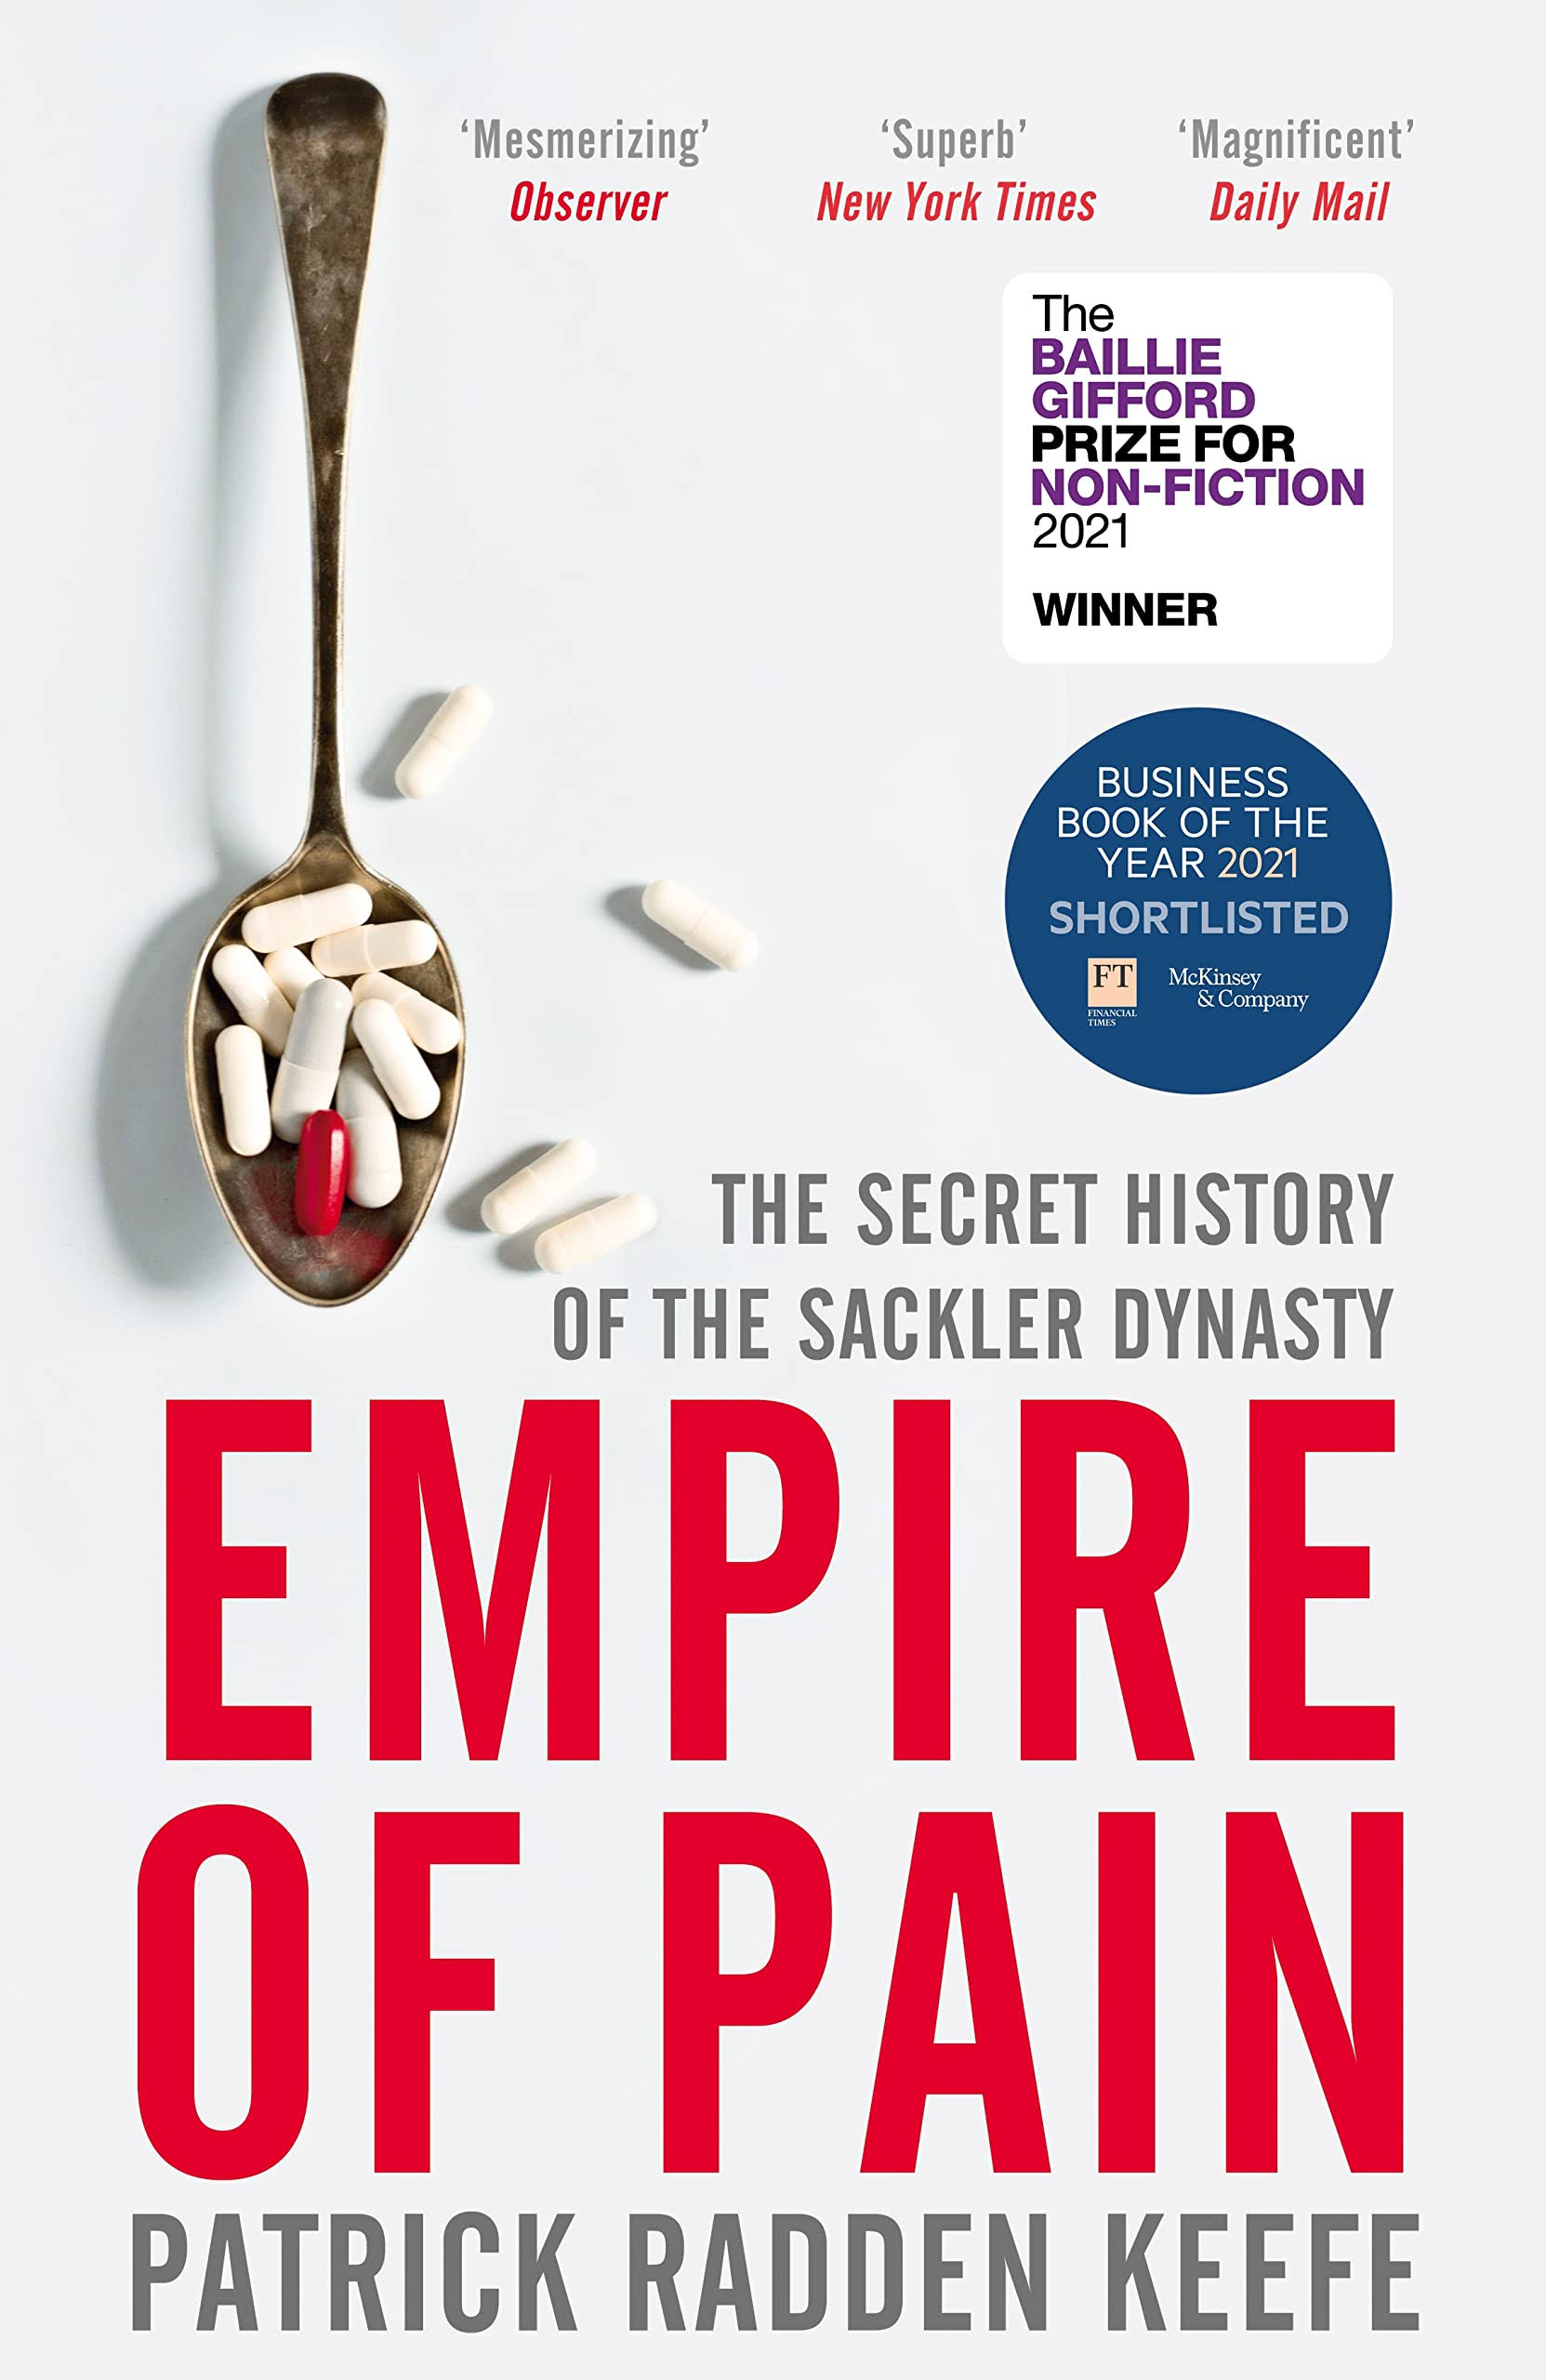 Empire of Pain: The Secret History of the Sackler Dynasty [Book]